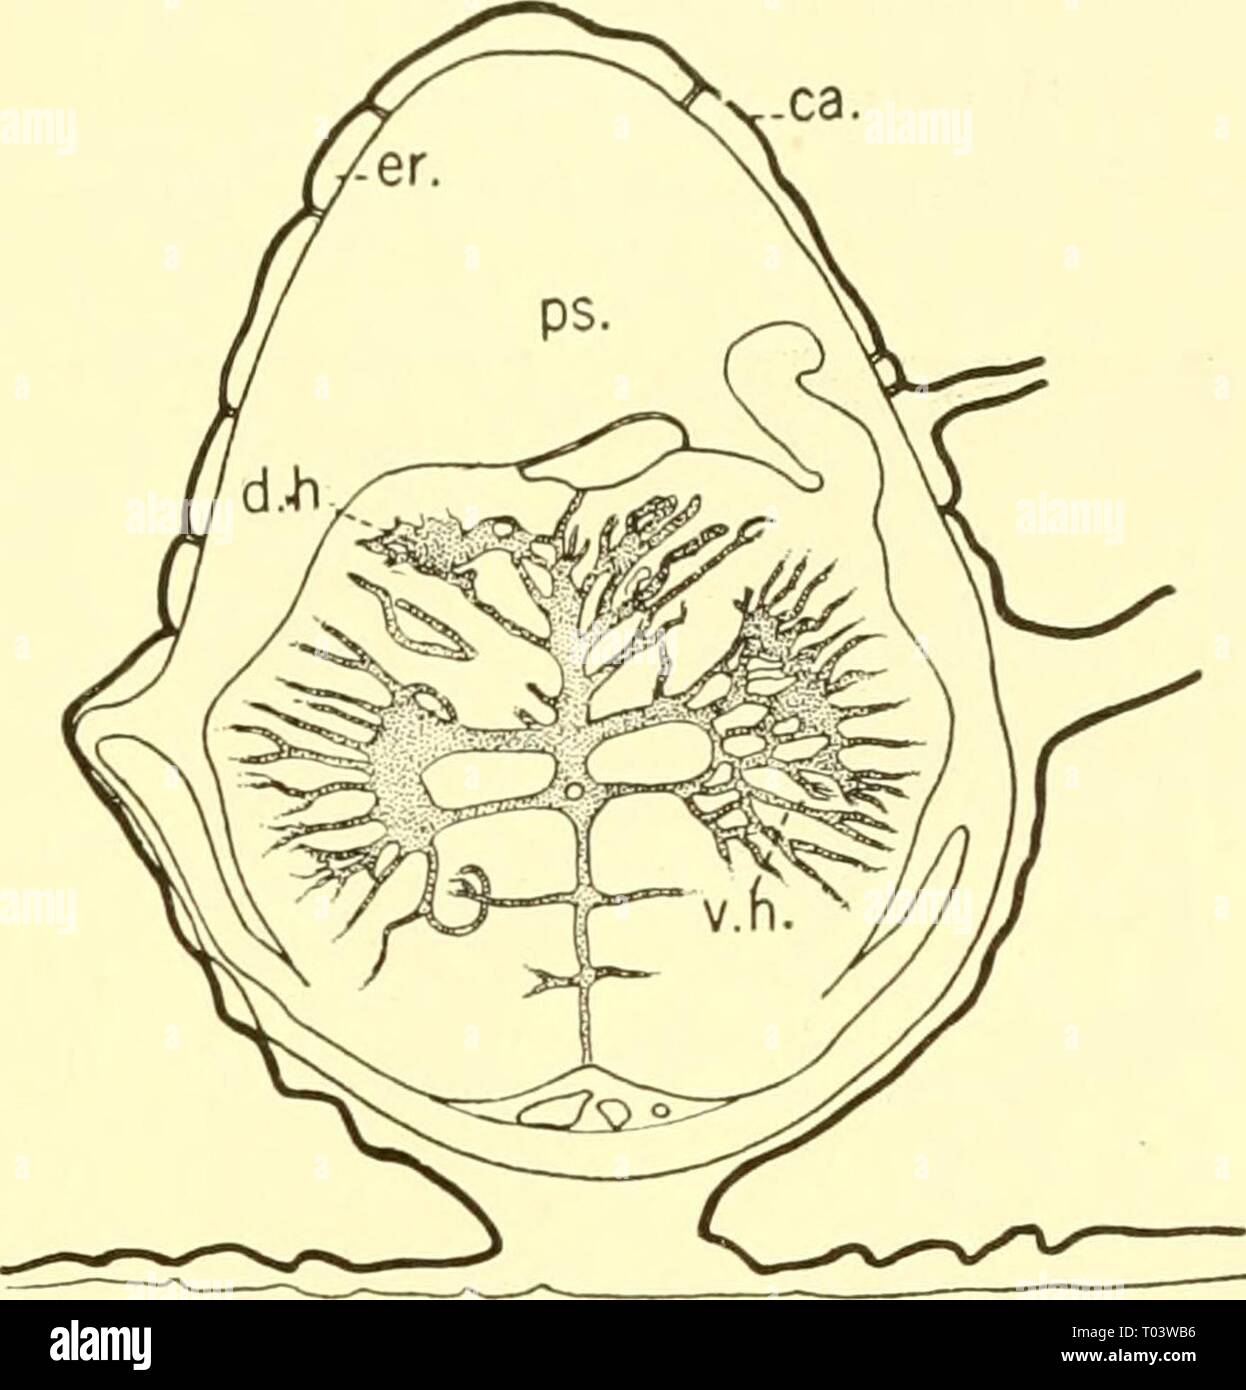 The elasmobranch fishes . elasmobranchfish03dani Year: 1934  A B Fig. 217. Transverse sections of the spinal cord. (From Sterzi.) A. Acanthias vulgaris. B. Baja clavata. ca., calcification; d.li., dorsal horn; d.r., dorsal root; er., endorachis; nc, neurocoele; pm., paracentral mass; ps., perimeningeal space; v.h., ventral horn. sixth nerve and the grey matter of the formatio-reticularis {f.r., fig. 216) is occupied in the cord by the ventral horn {v.h., fig. 217); while the general cutaneous nucleus of the medulla (g.c.n.) gives place to the dorsal horn of the cord (d.h., fig. 217); and the l Stock Photo